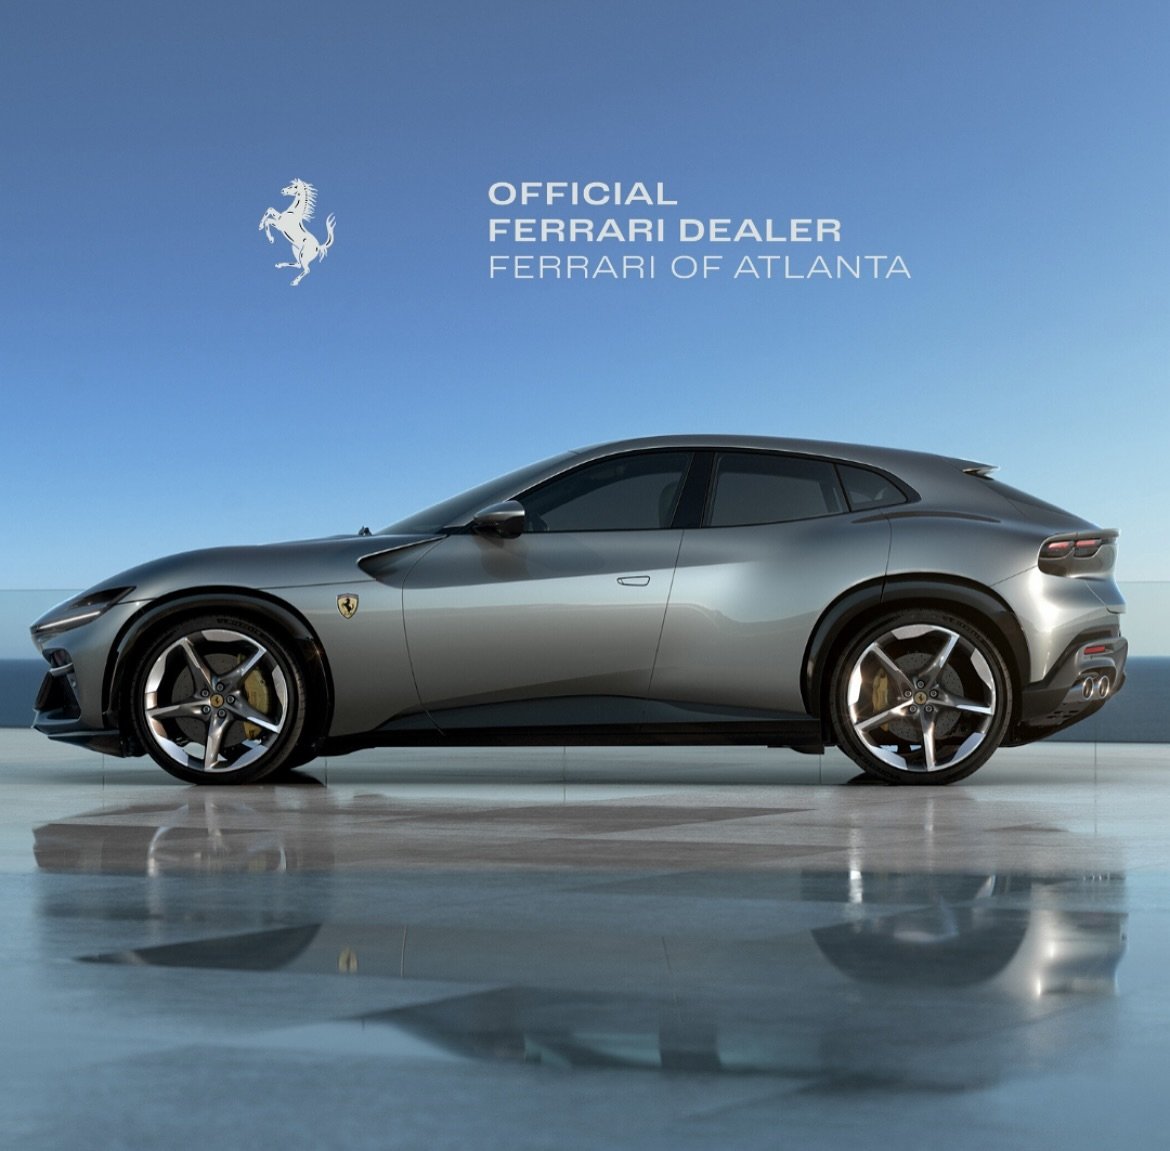 Designed to deliver an exhilarating driving experience on any terrain, the Purosangue combines the dynamic agility of a sports car with the versatility and practicality of an SUV. 

Every aspect of its design and engineering reflects Ferrari&rsquo;s 